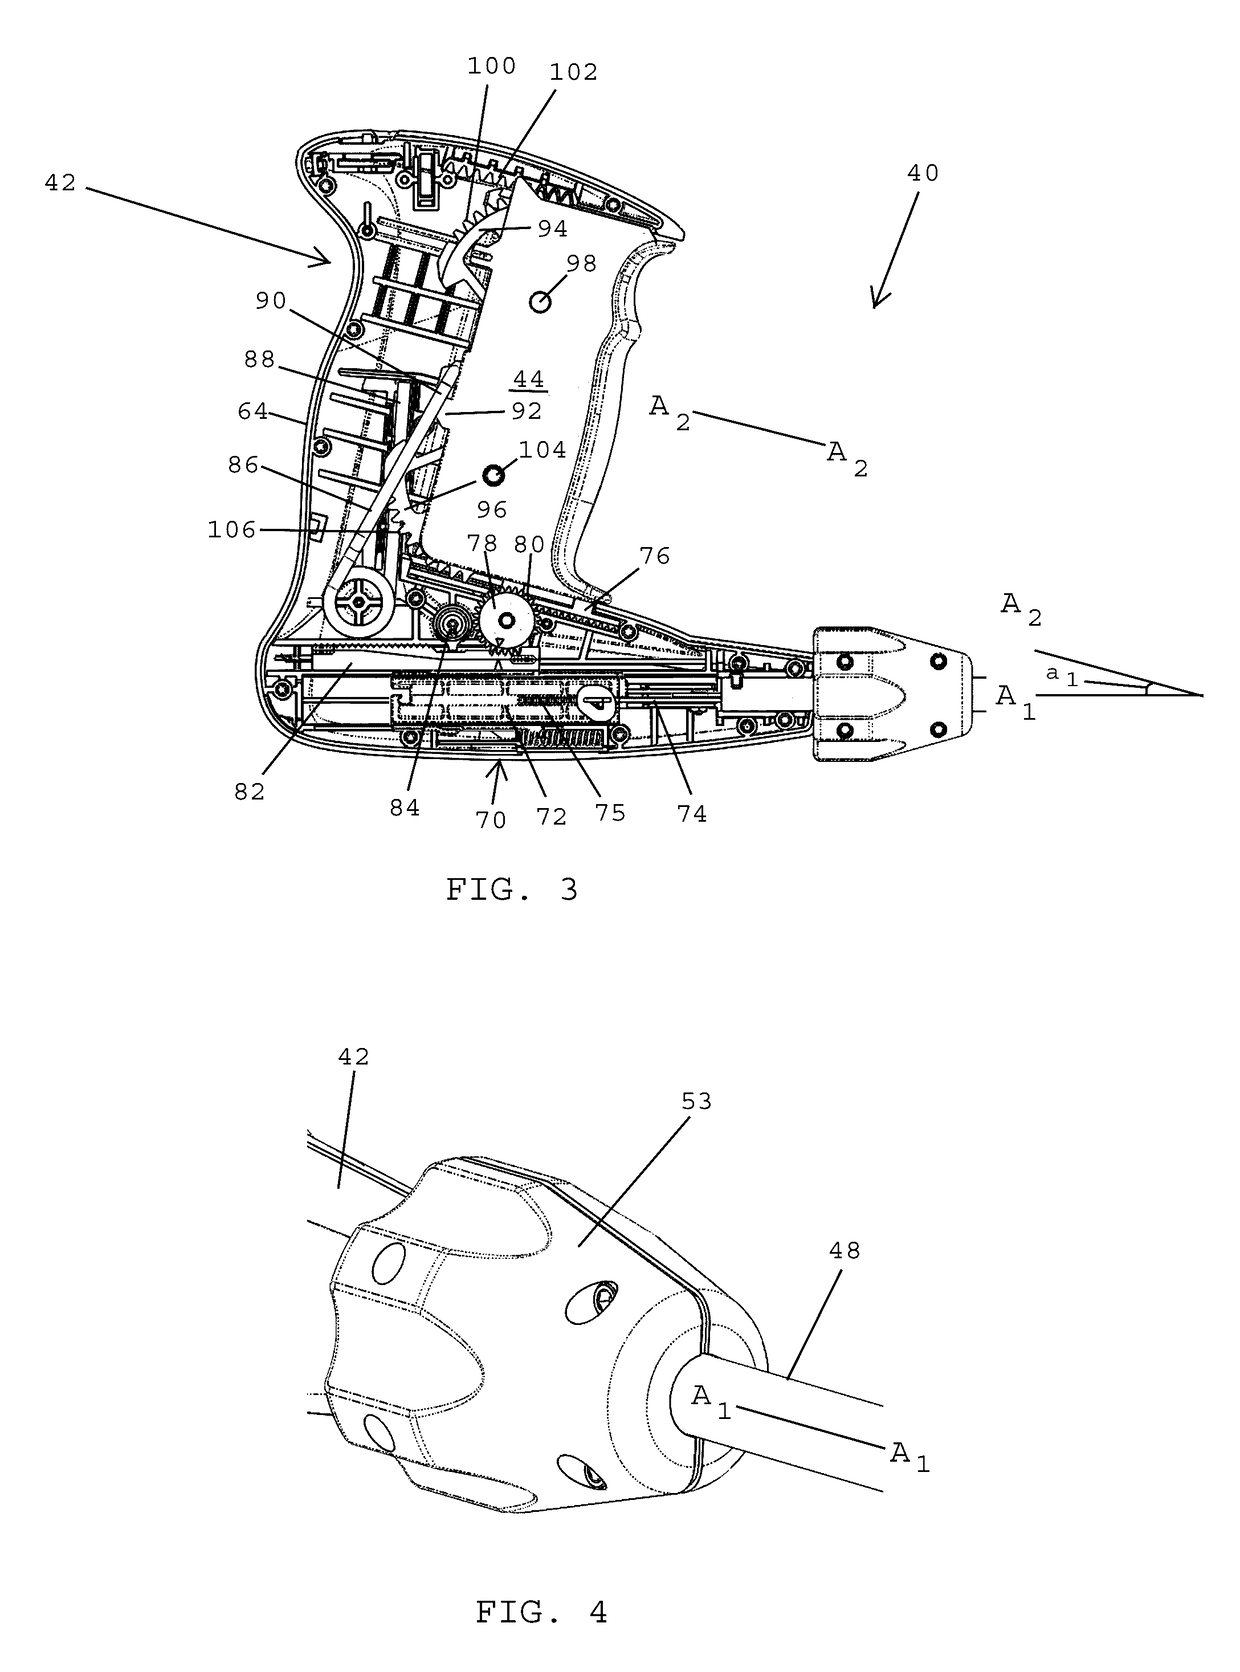 Applicator instruments for dispensing surgical fasteners having articulating shafts and articulation control elements